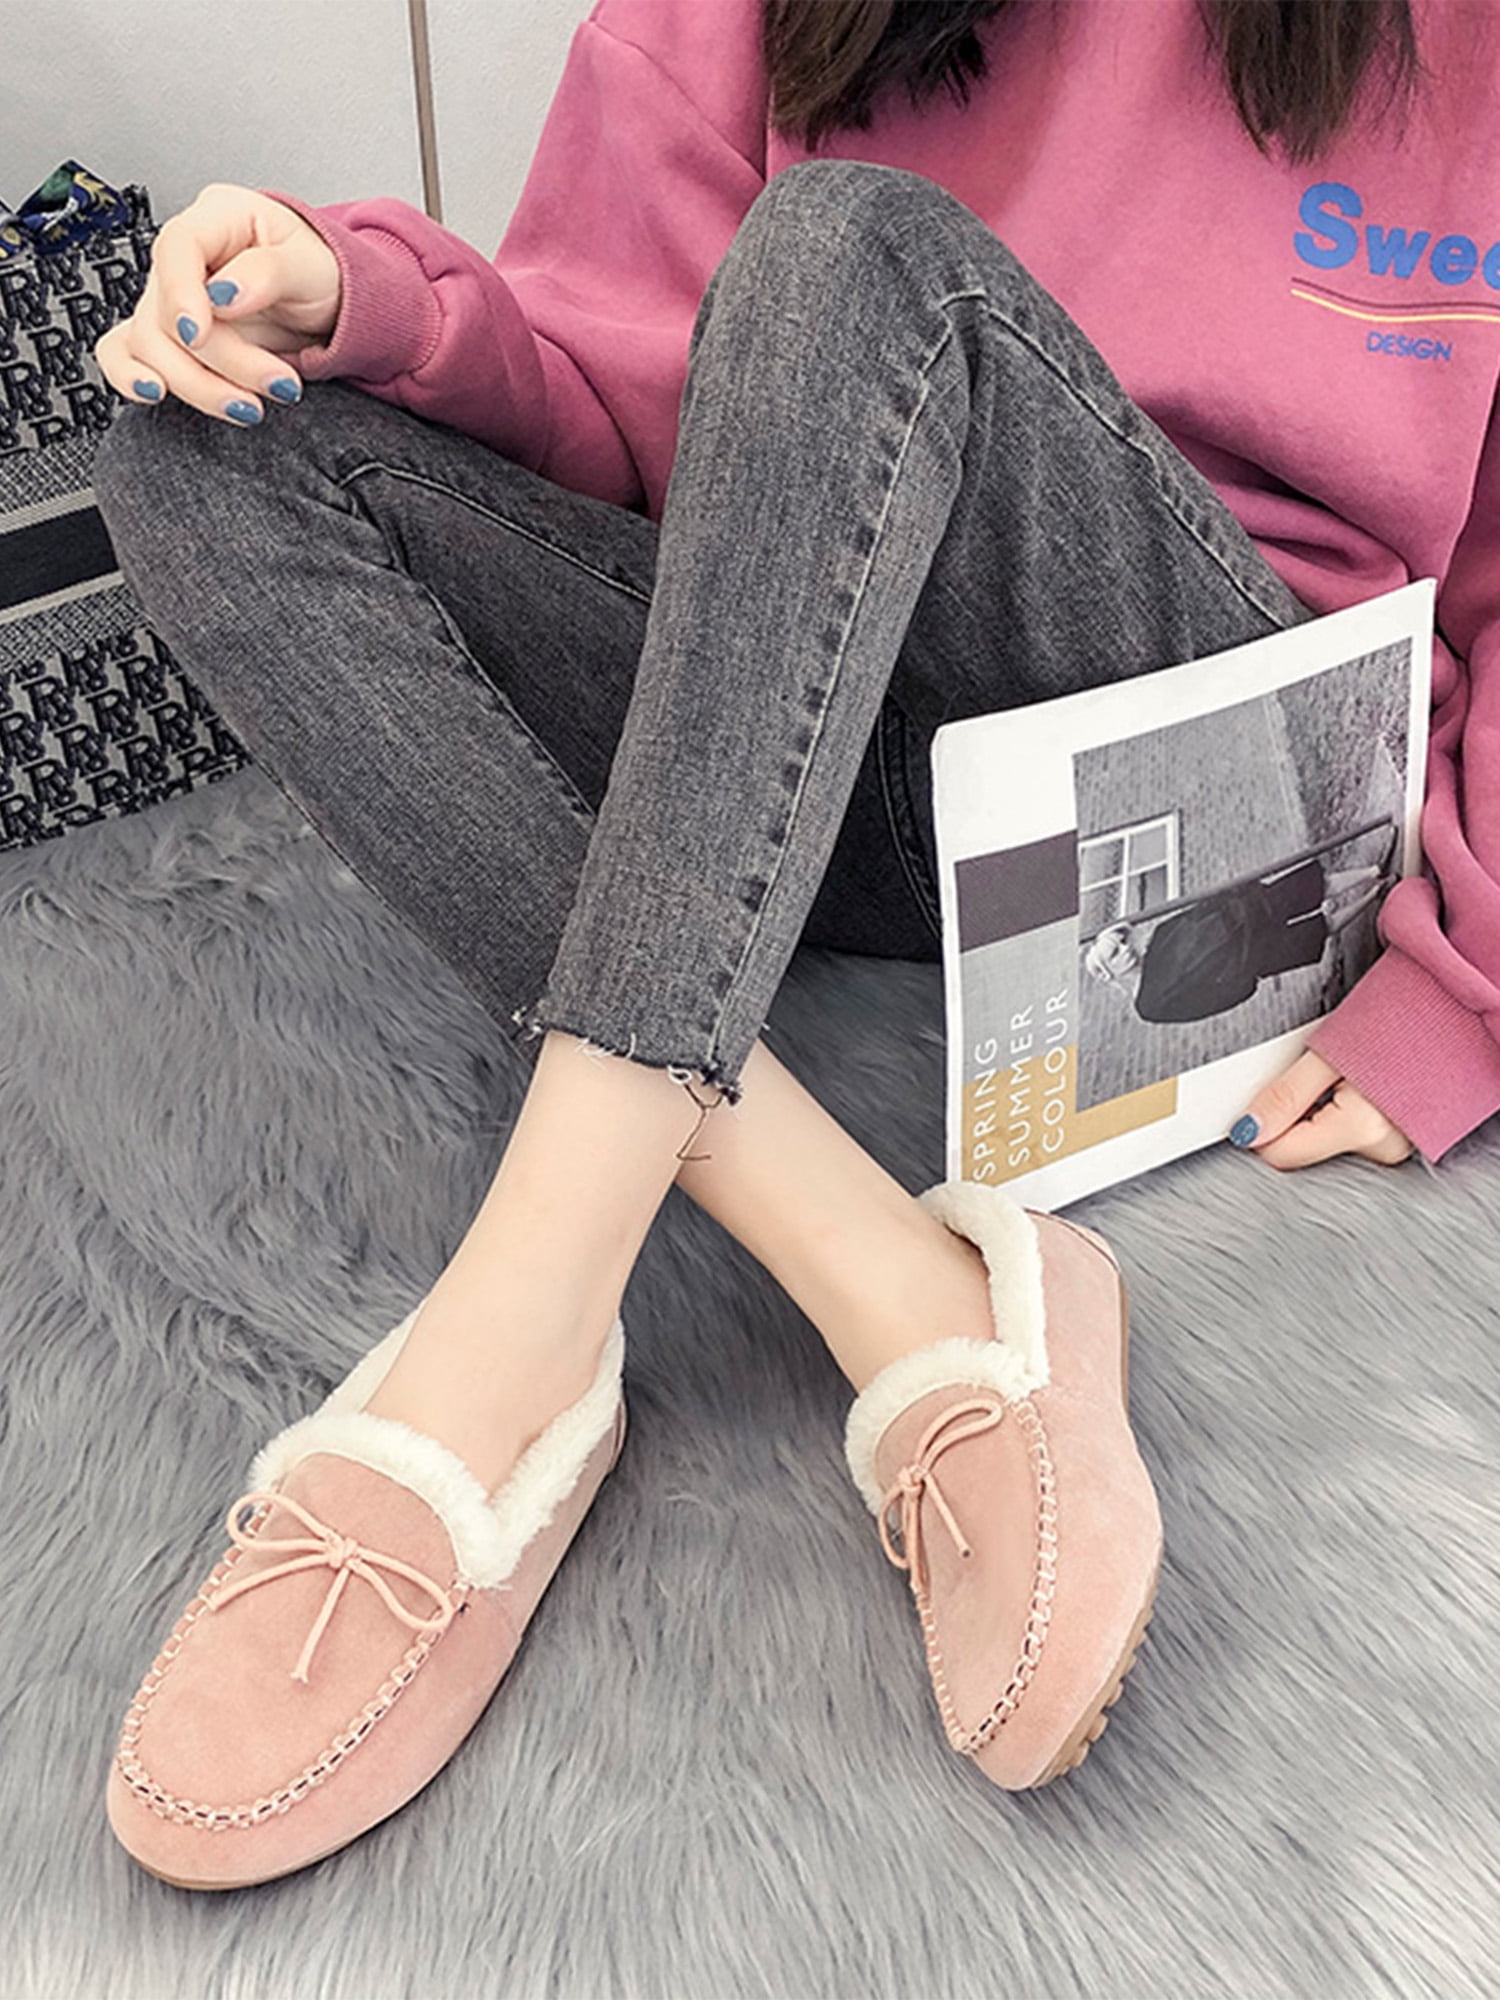 Details about   Women Bow Loafers Flat Comfy Shoes Casual Bowknot Autumn Platform Low Heel Shoes 